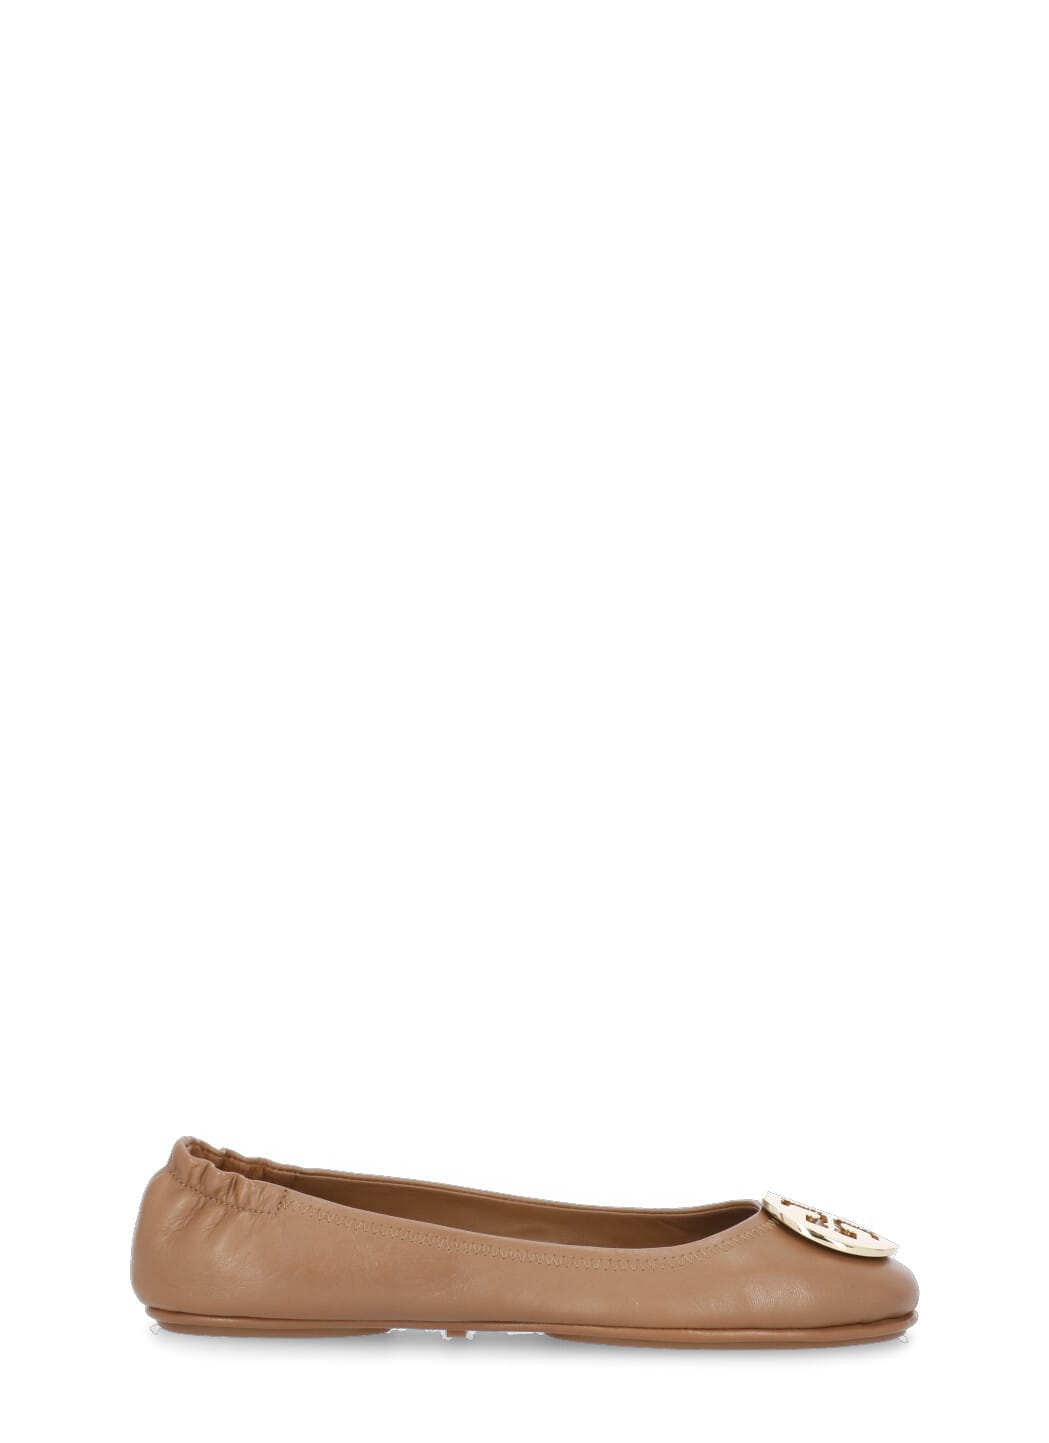 Shop Tory Burch Minnie Ballerina Shoes In Brown